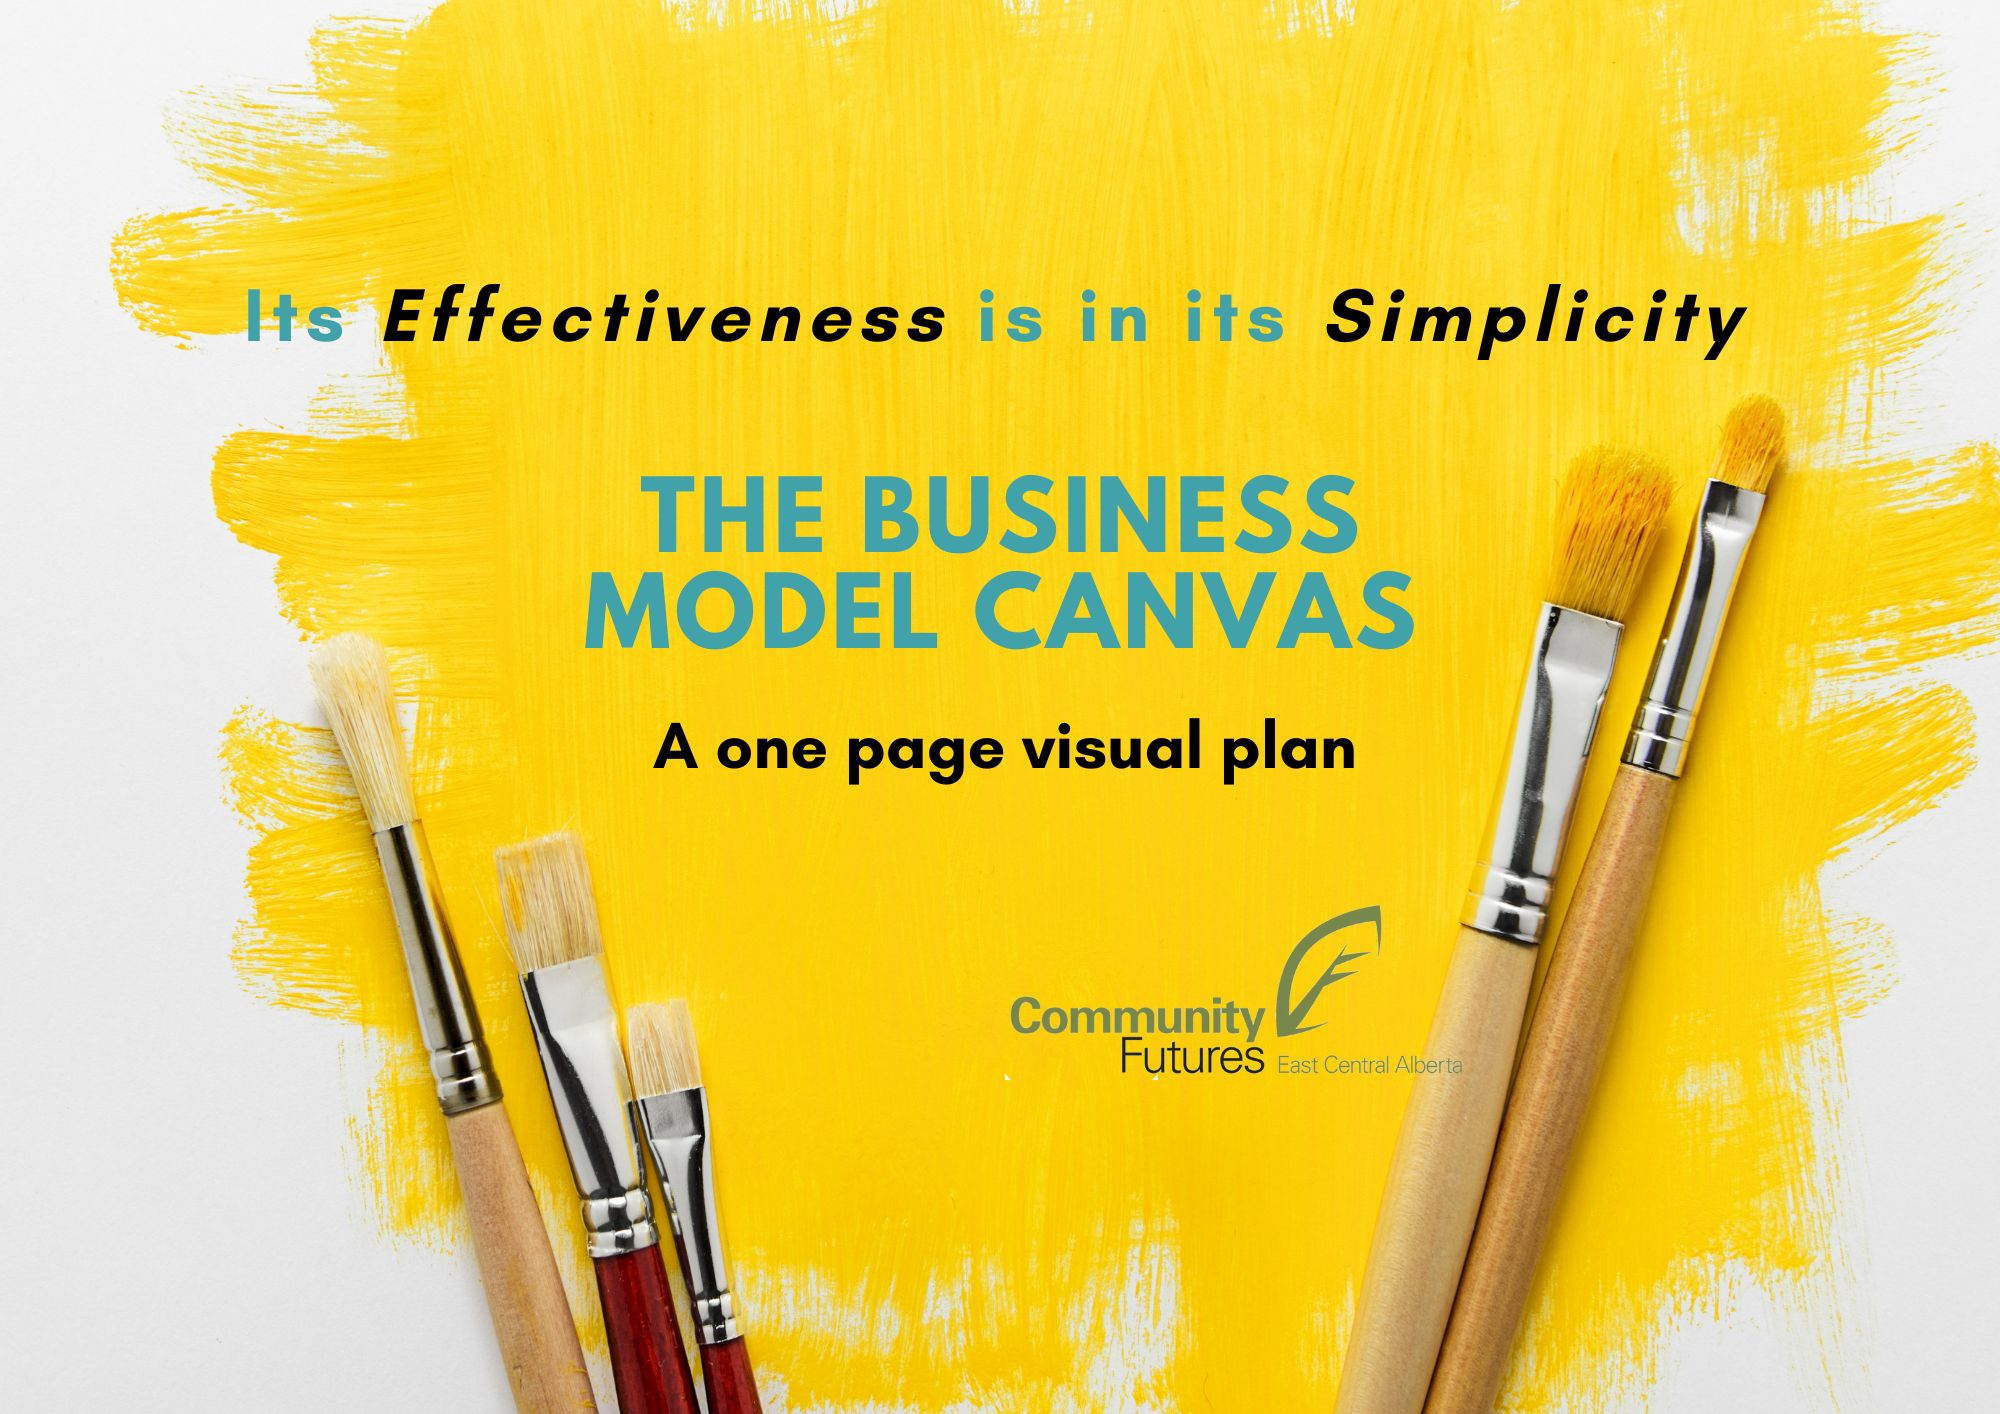 The Business Model Canvas: Its Effectiveness is in its Simplicity